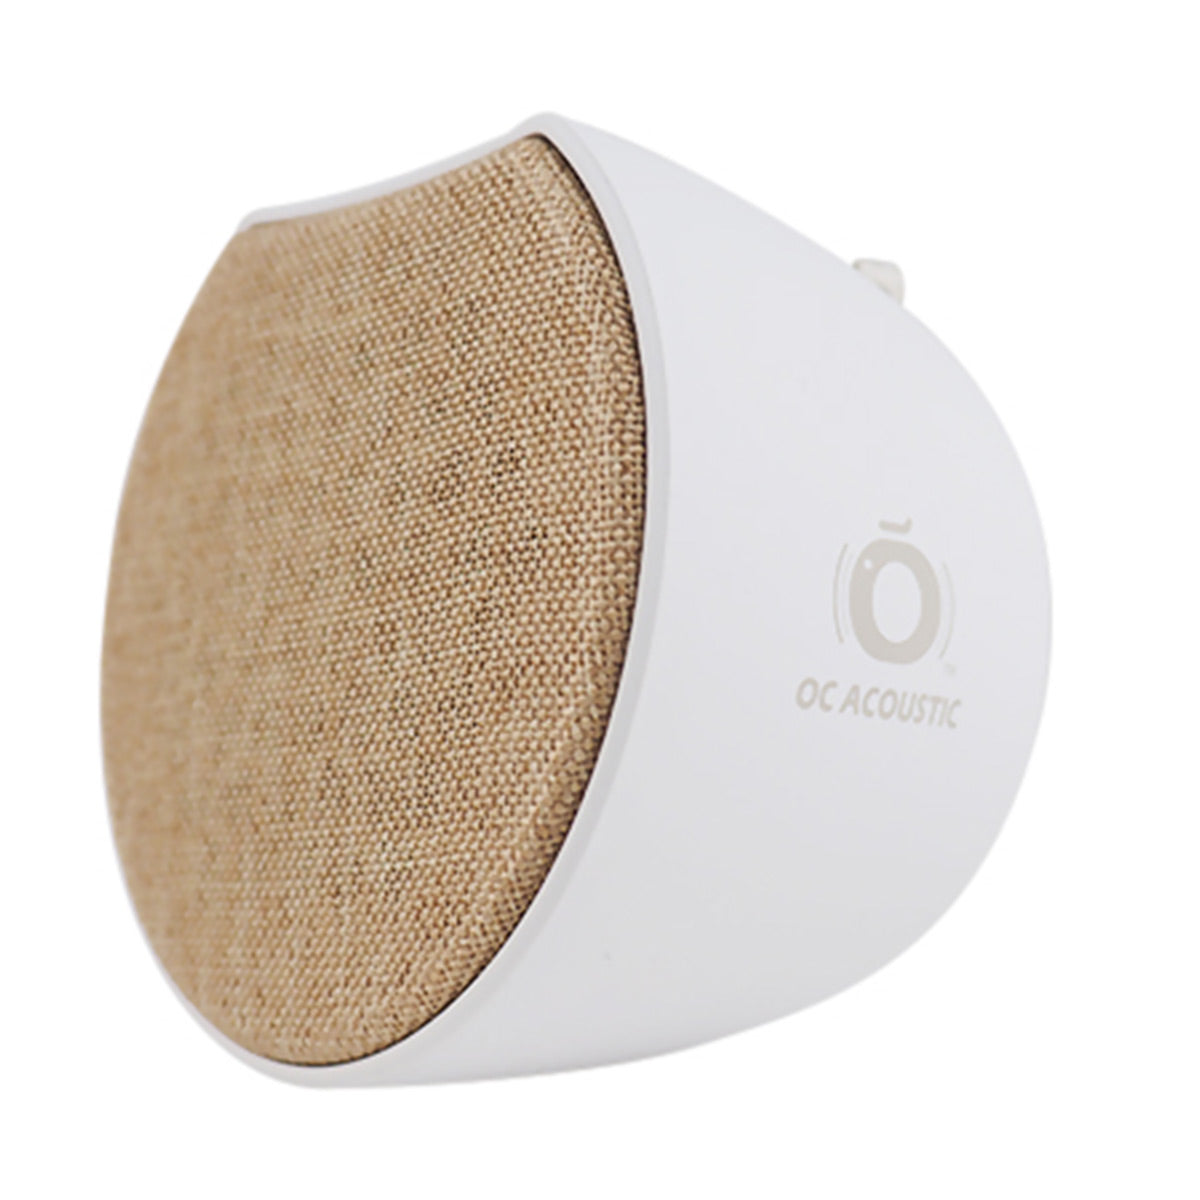 OC Acoustic Newport Plug-in Outlet Speaker with Bluetooth 5.1 and Built-in USB Type-A Charging Port - Set of 6 (Champagne/White and Charcoal/Black)